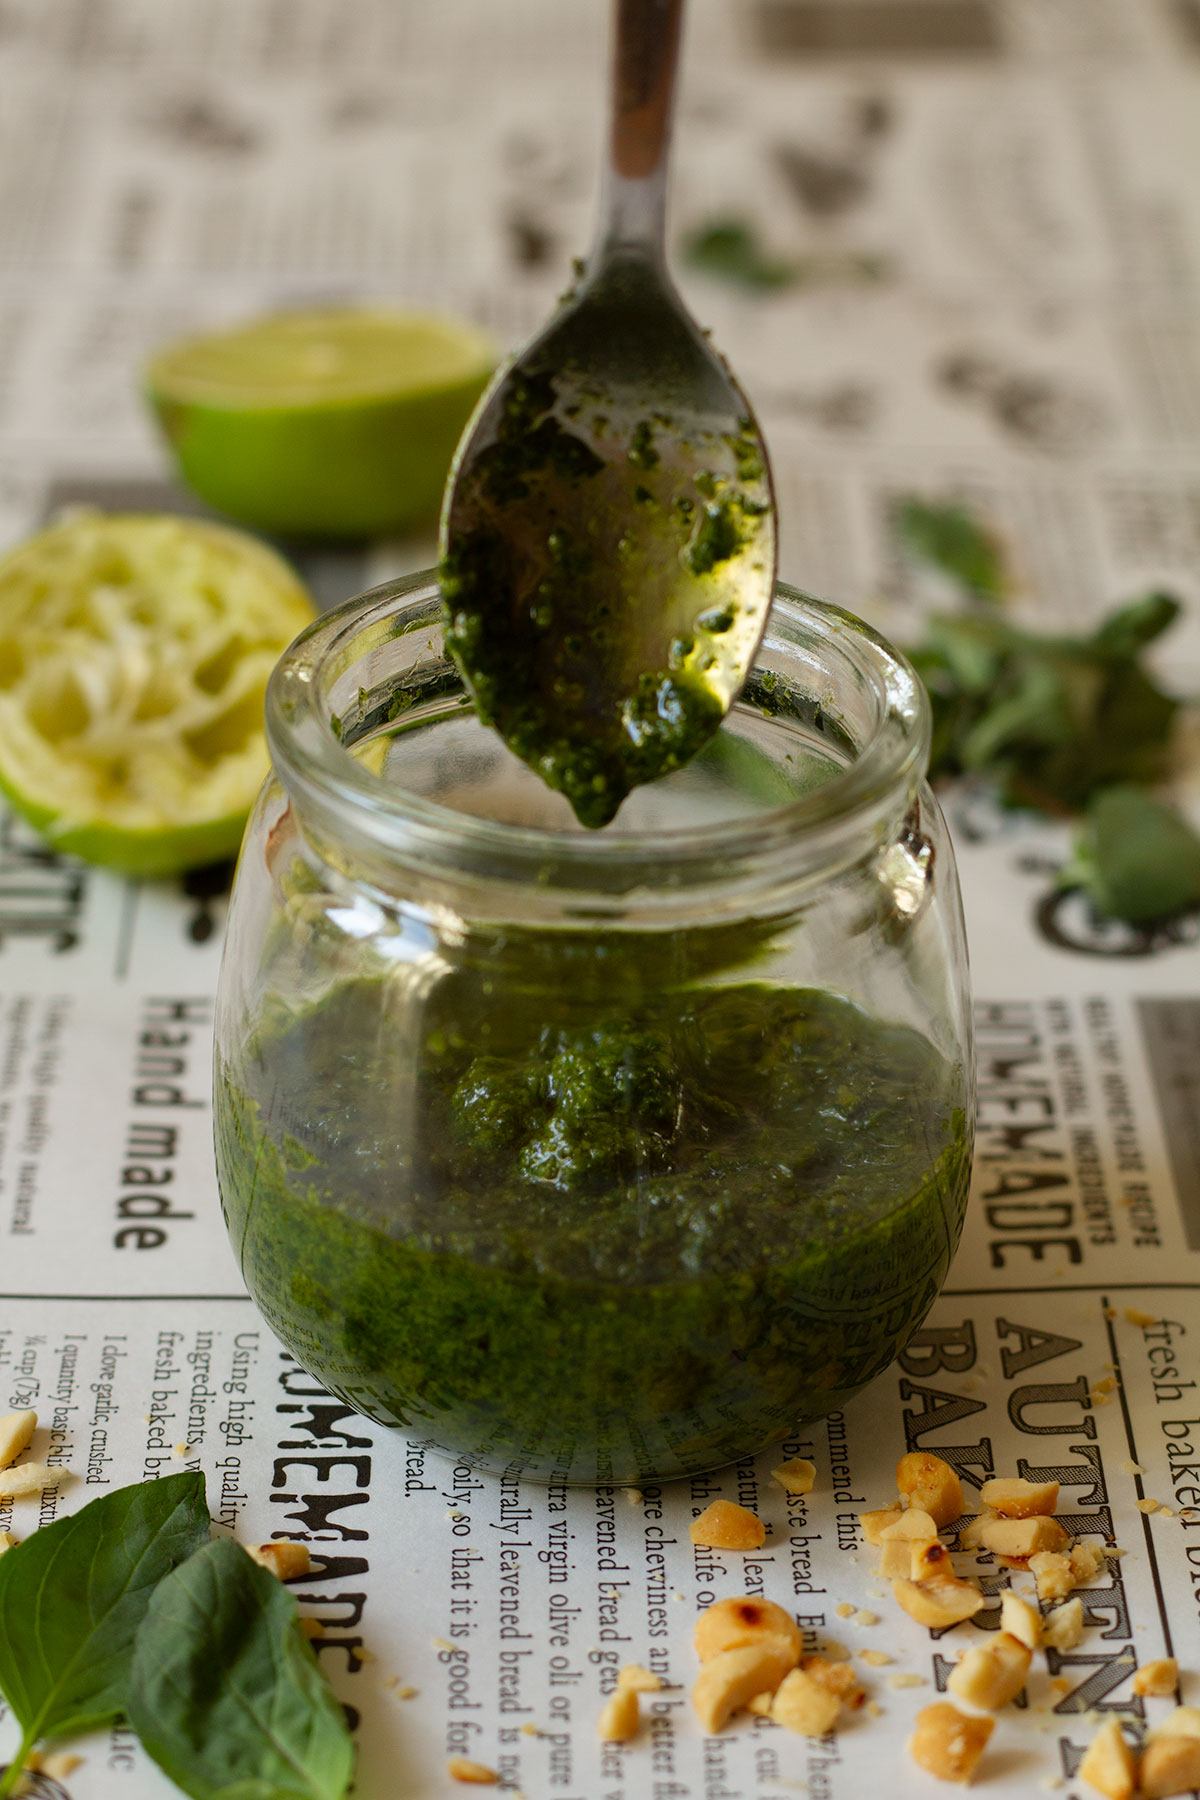 Thai Basil Pesto in a glass jar with a spoon on a newspaper themed background with a scattering of peanuts and basil leaf in the foreground and a squeezed lime behind the jar.